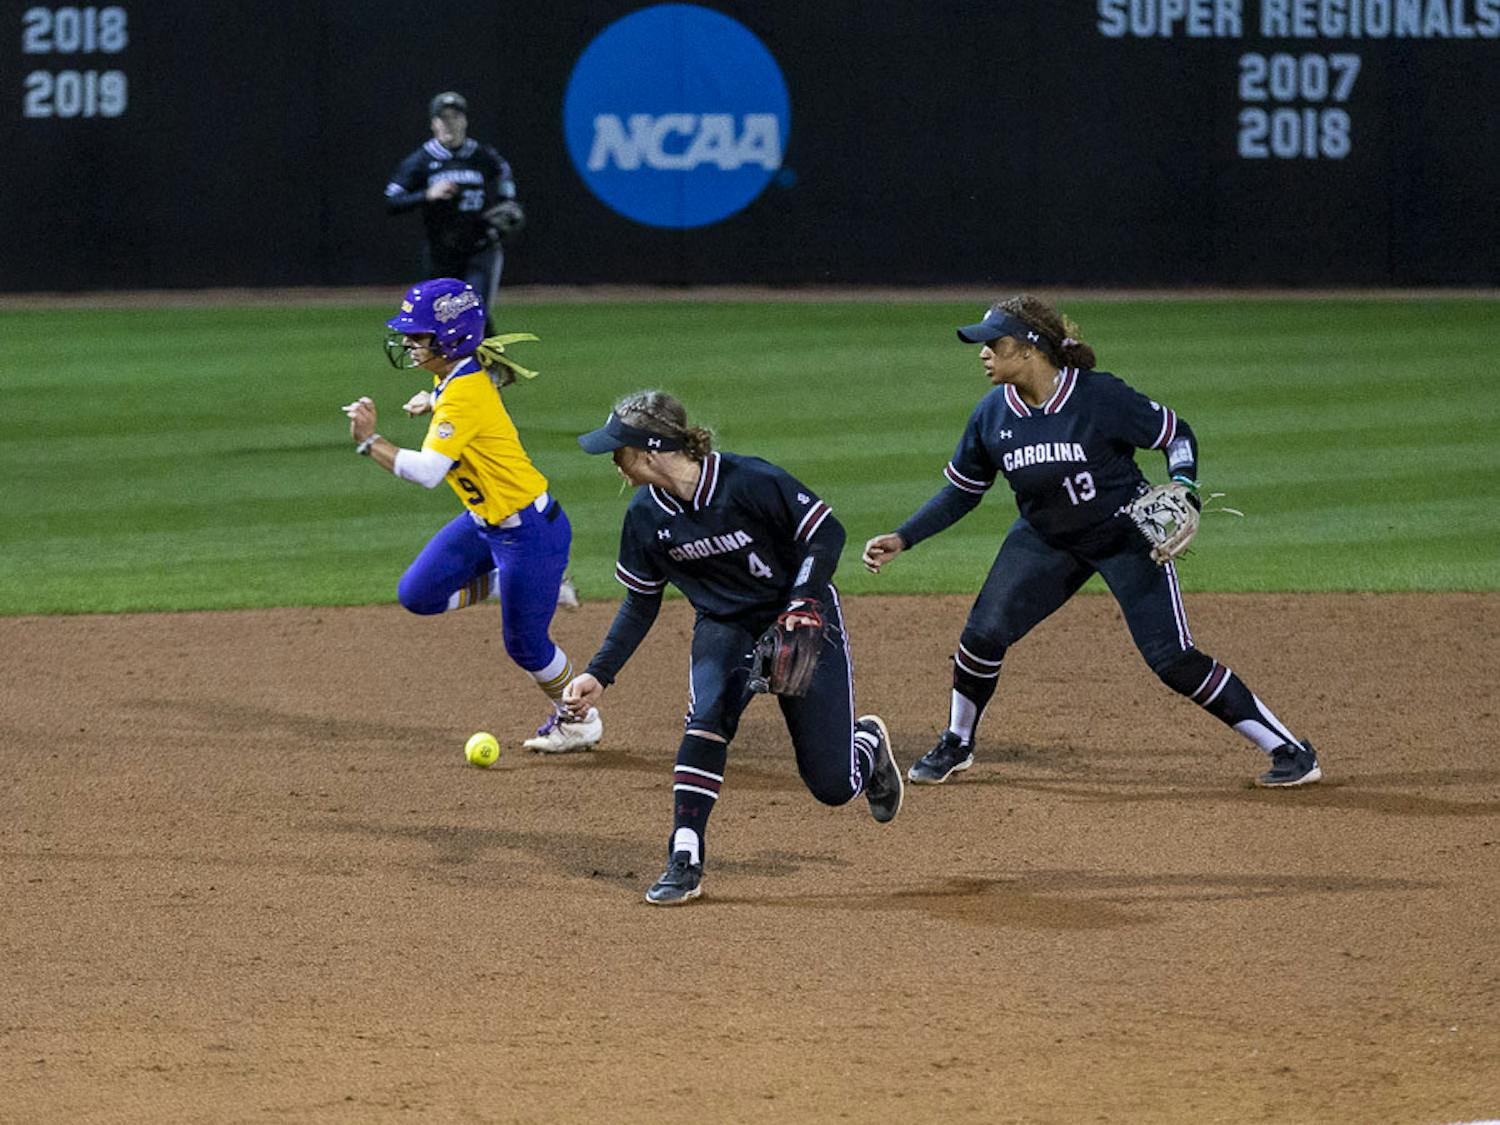 LSU sophomore outfielder Madilyn Giglio runs past South Carolina's offense after sophomore infielder Brooke Blankenship makes an error on the play, allowing two RBIs for LSU during the second match of the doubleheader at Beckham Field on March 13, 2023. The Tigers beat the Gamecocks 5-1.